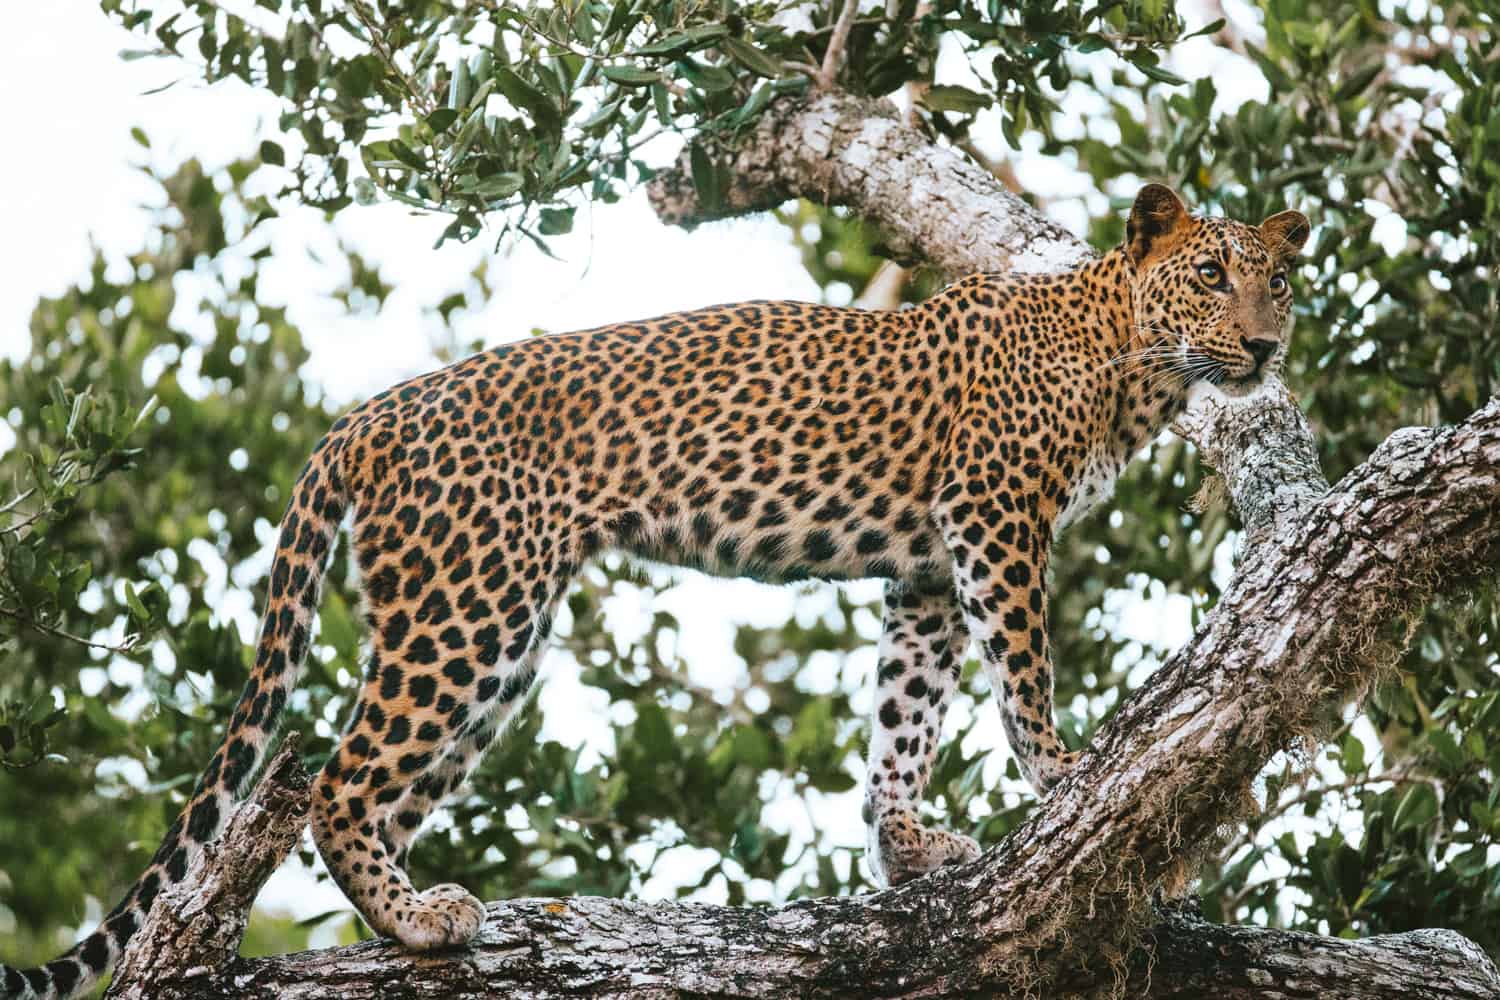 Where to see leopards in Sri Lanka